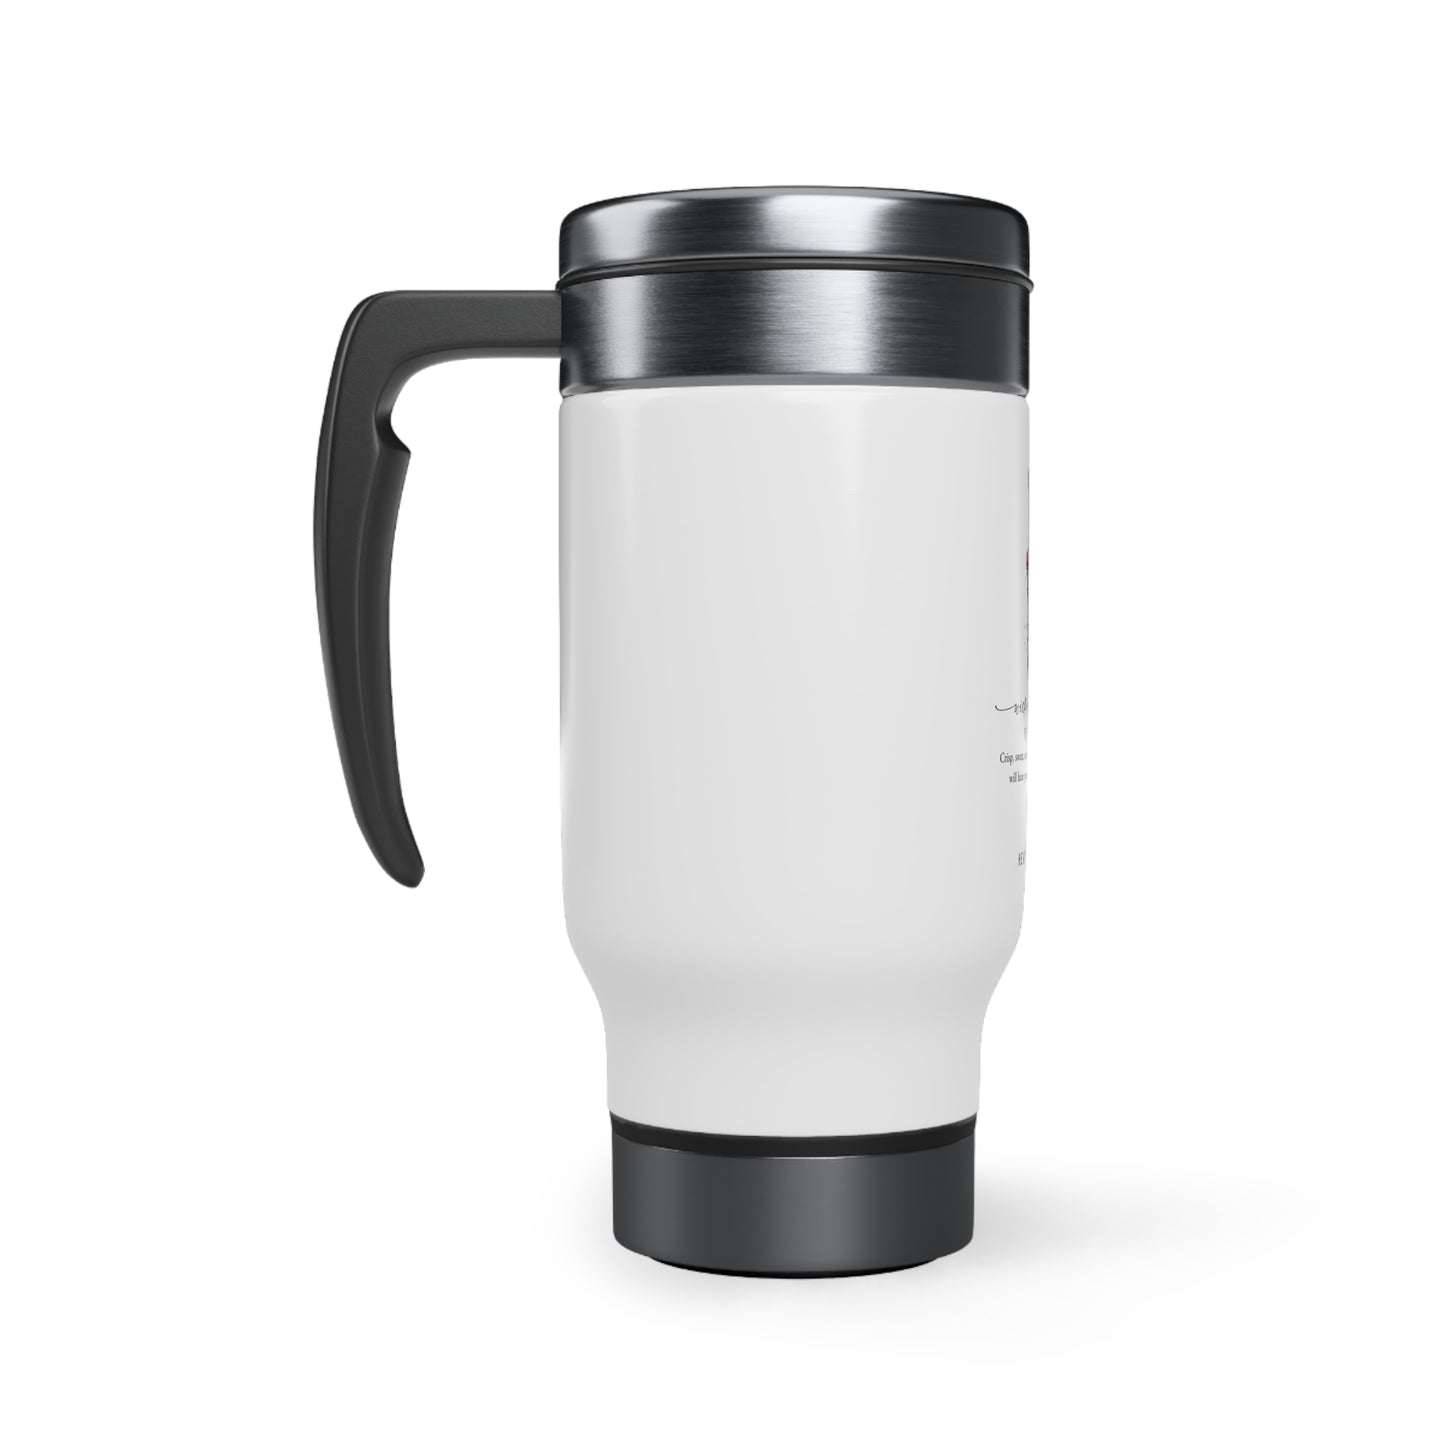 Wicked Winemakers Stainless Steel Travel Mug with Handle, 14oz